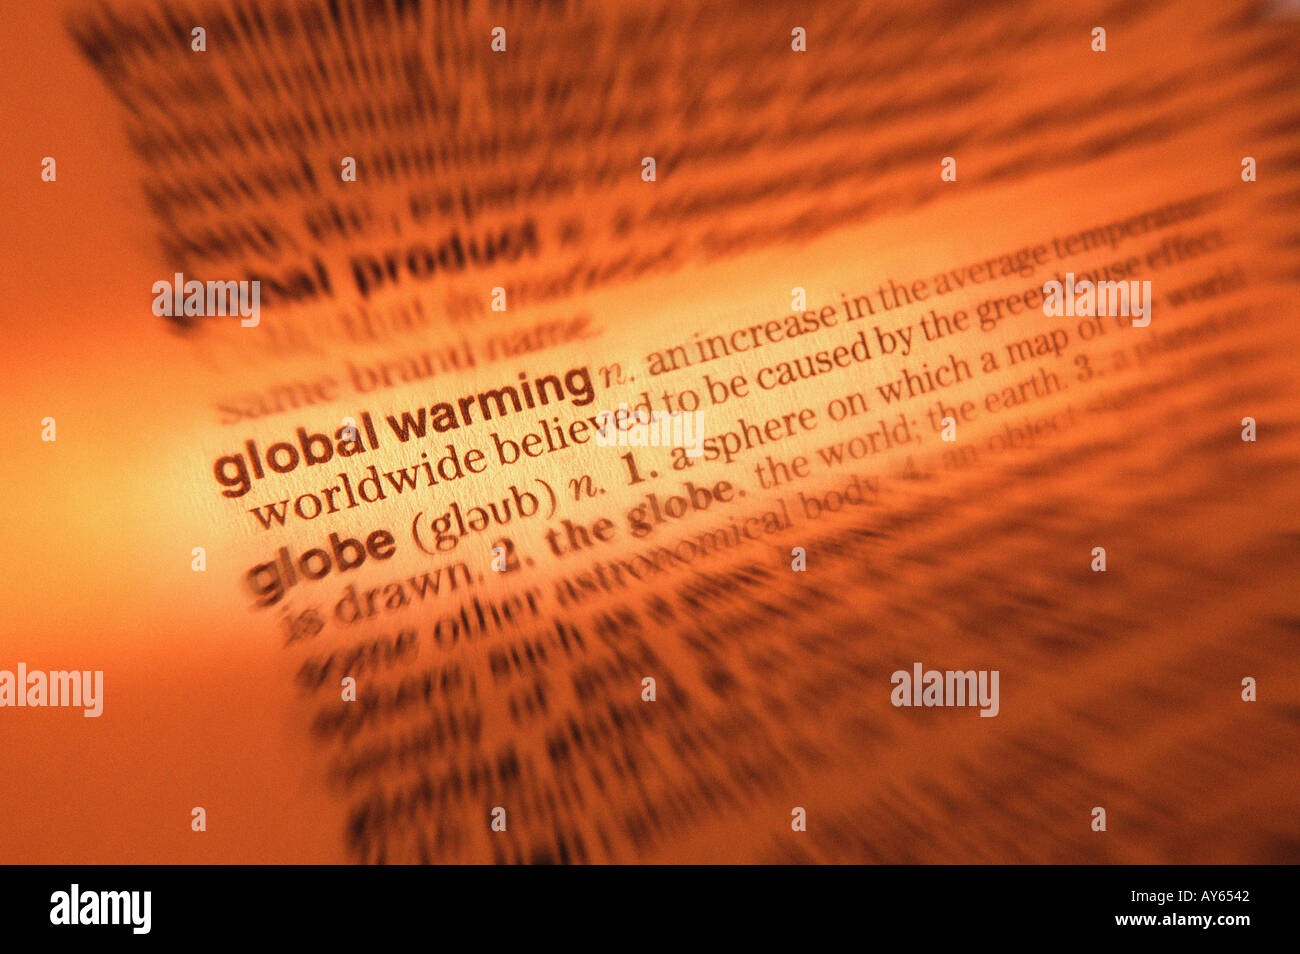 CLOSE UP OF DICTIONARY PAGE SHOWING DEFINITION OF THE WORDS GLOBAL WARMING Stock Photo